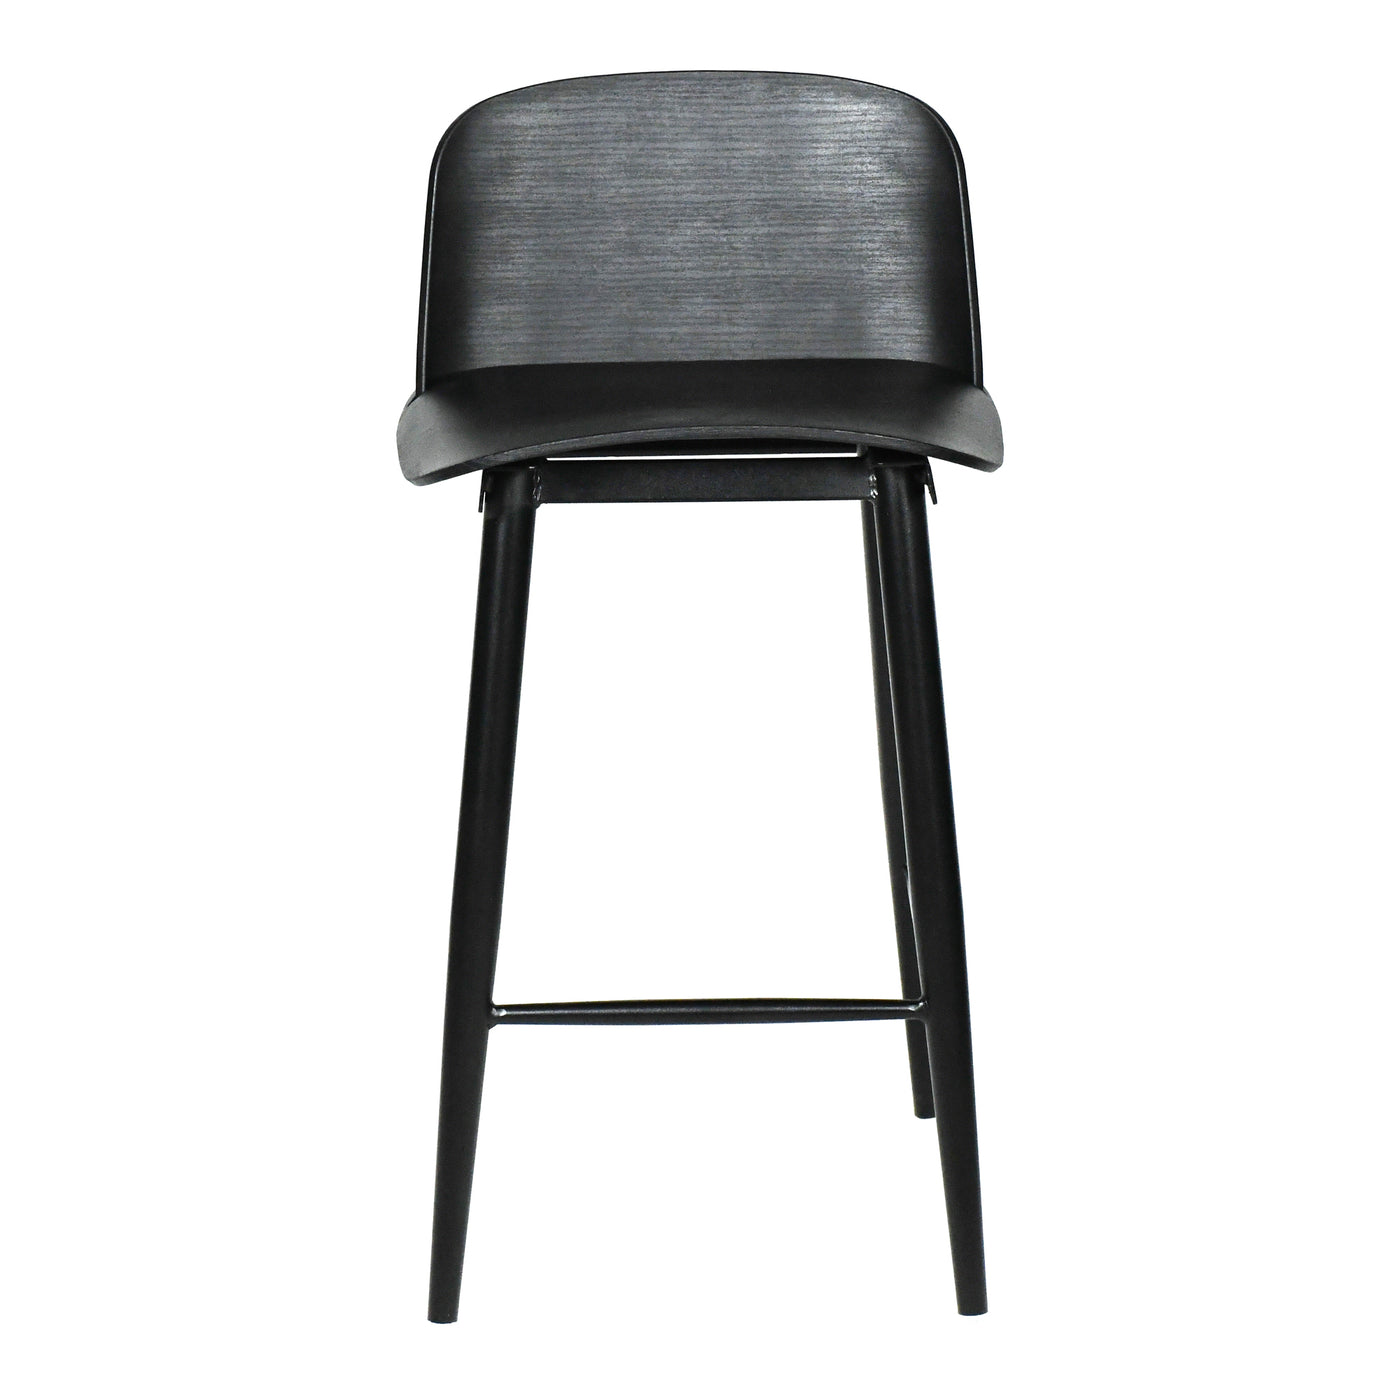 A sleek staple, Looey provides a comfortable perch for meals, drinks, or simply lounging. Its elegantly tapered legs featu...